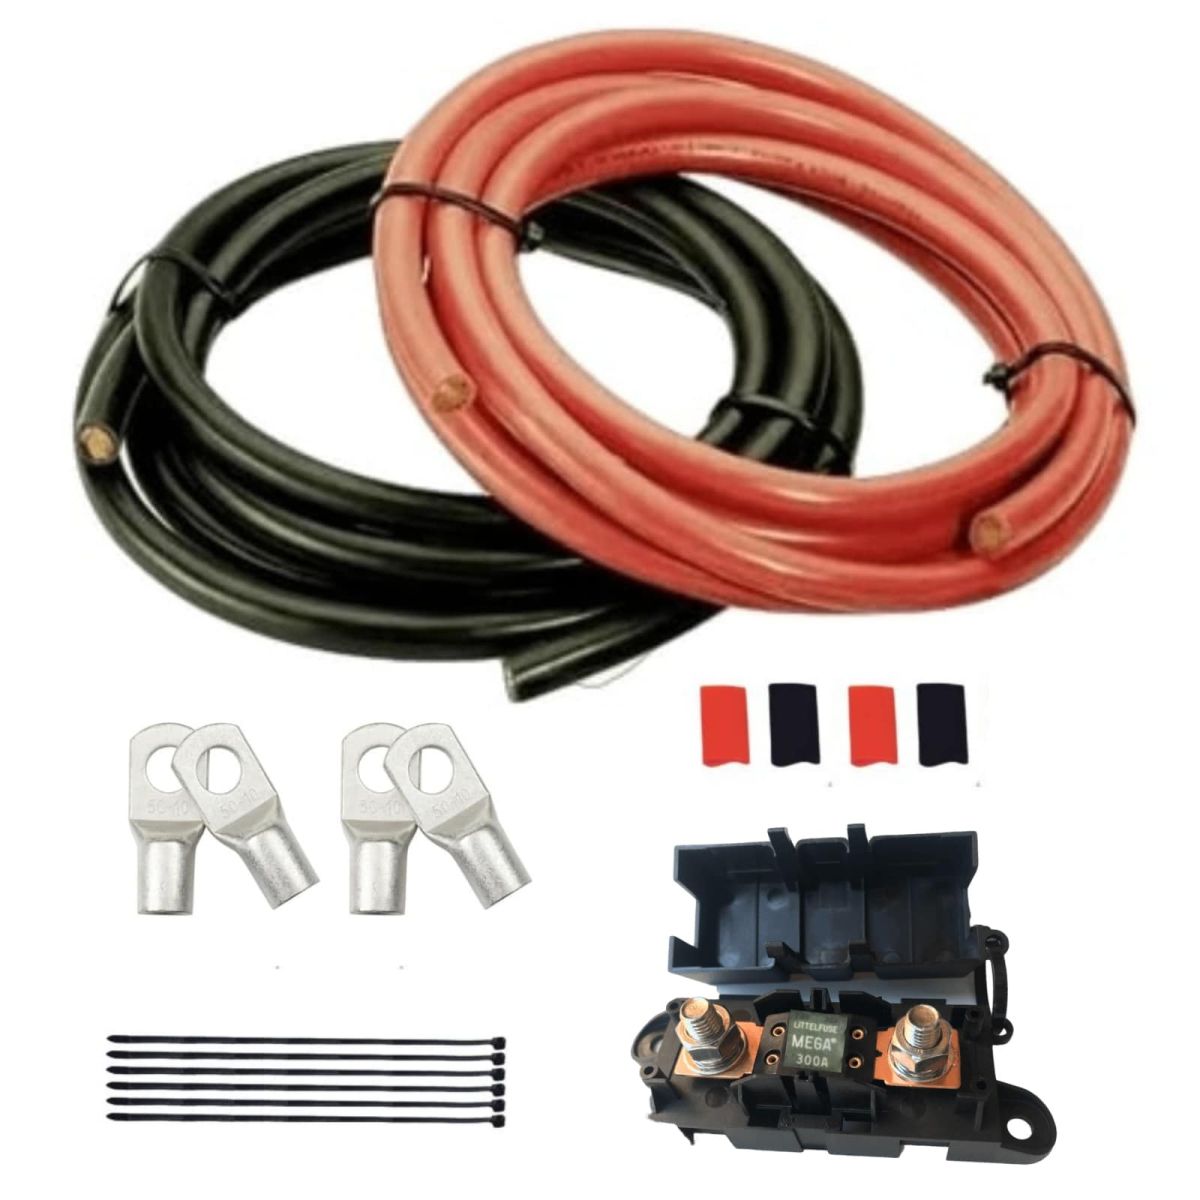 inverter wiring kit, 00 B&S cable, 292 AMP cable, TYCAB Cooper Wire